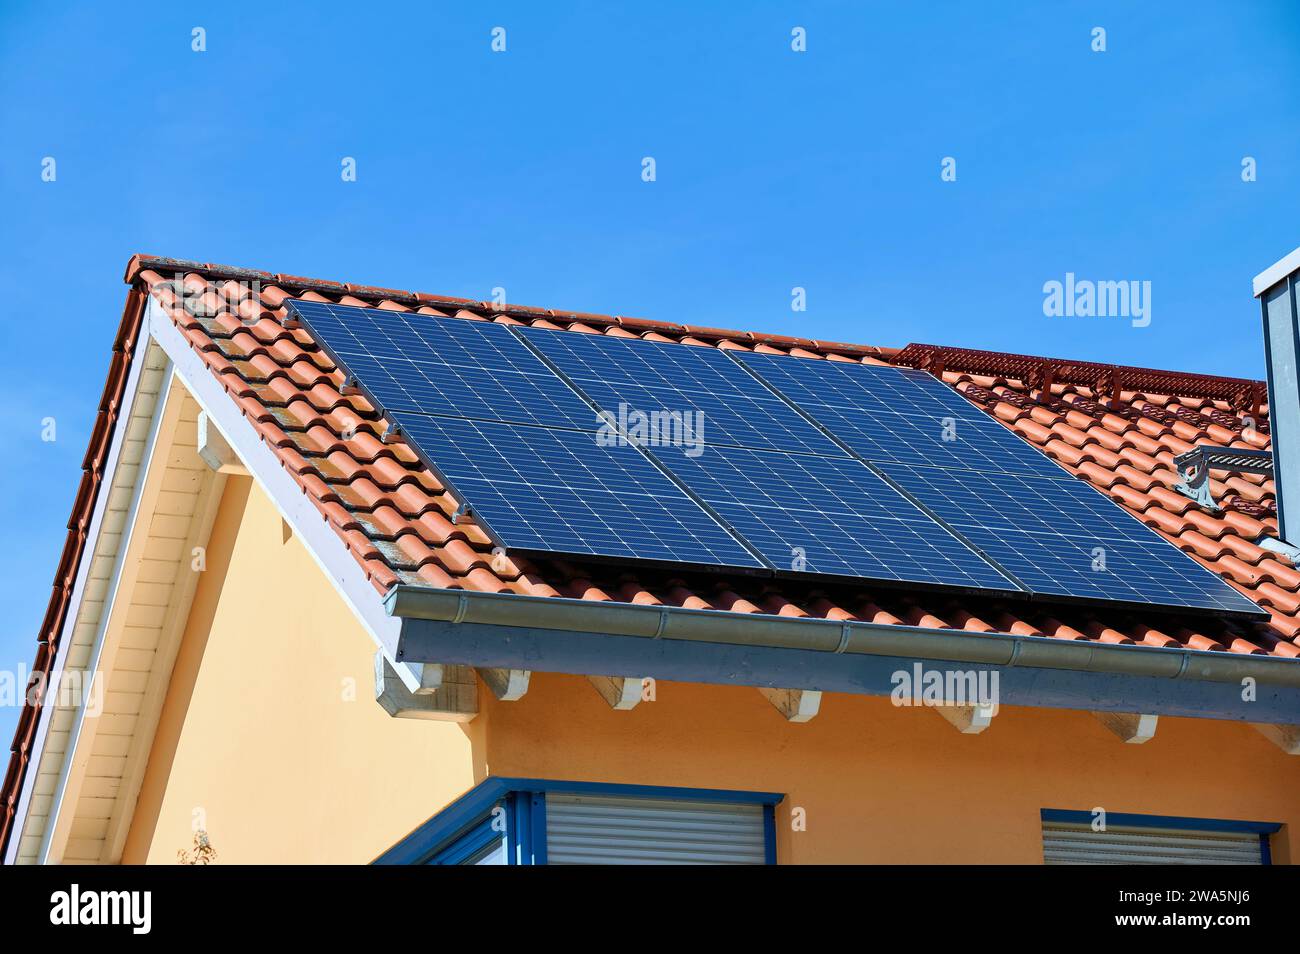 Solar panels on the roof of a newly built detached house against a blue sky Stock Photo